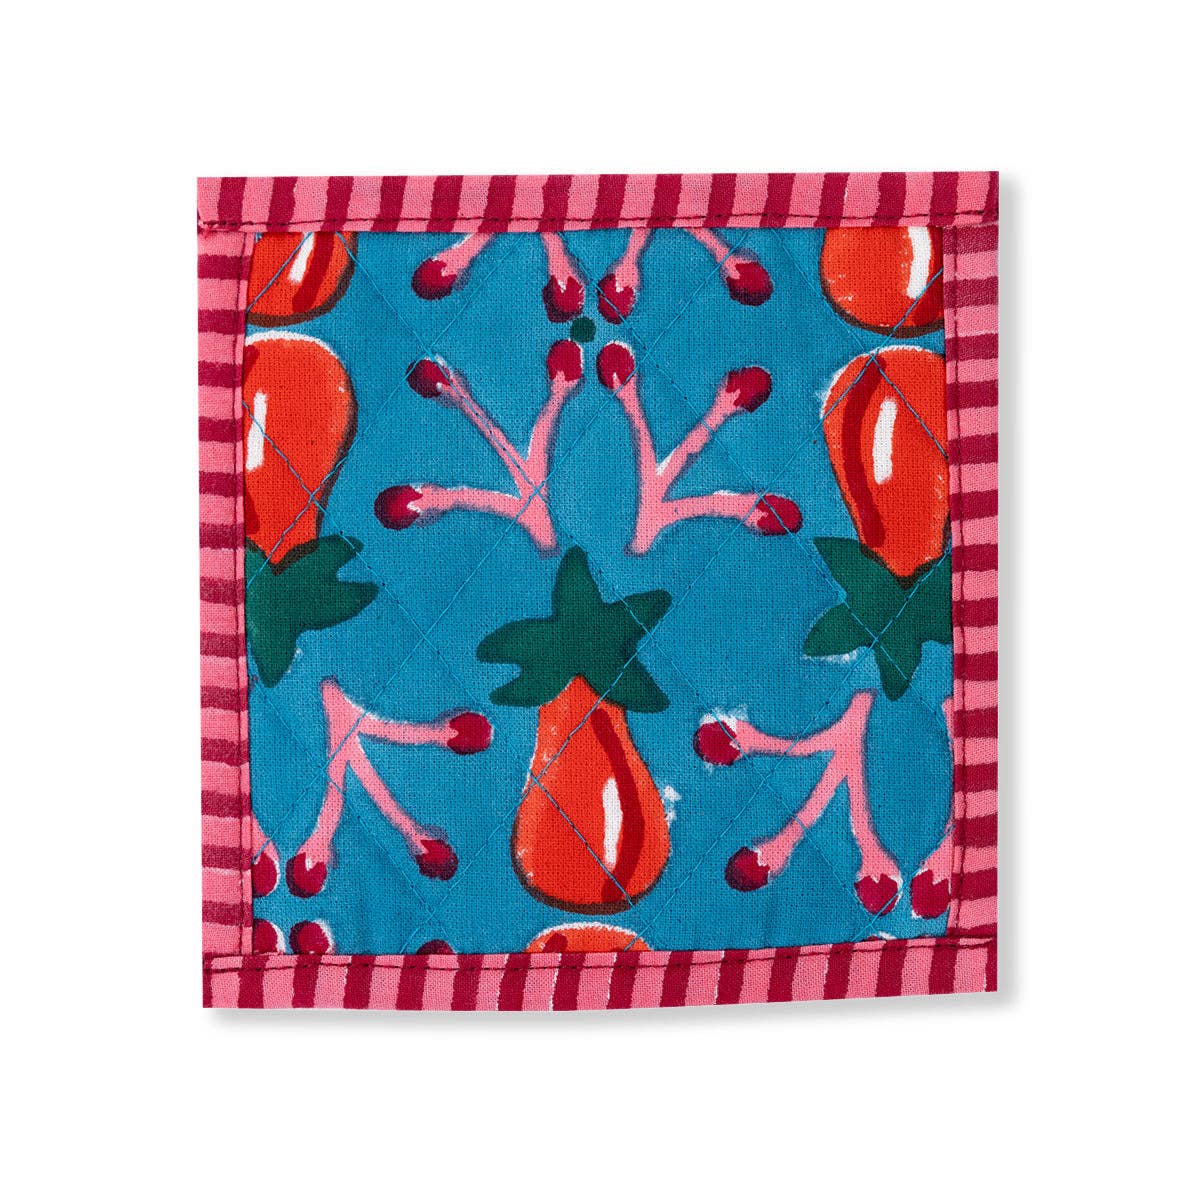 The Every Space 100% cotton coasters in red and blue Wilshire blockprint by Furbish studio, handmade in India